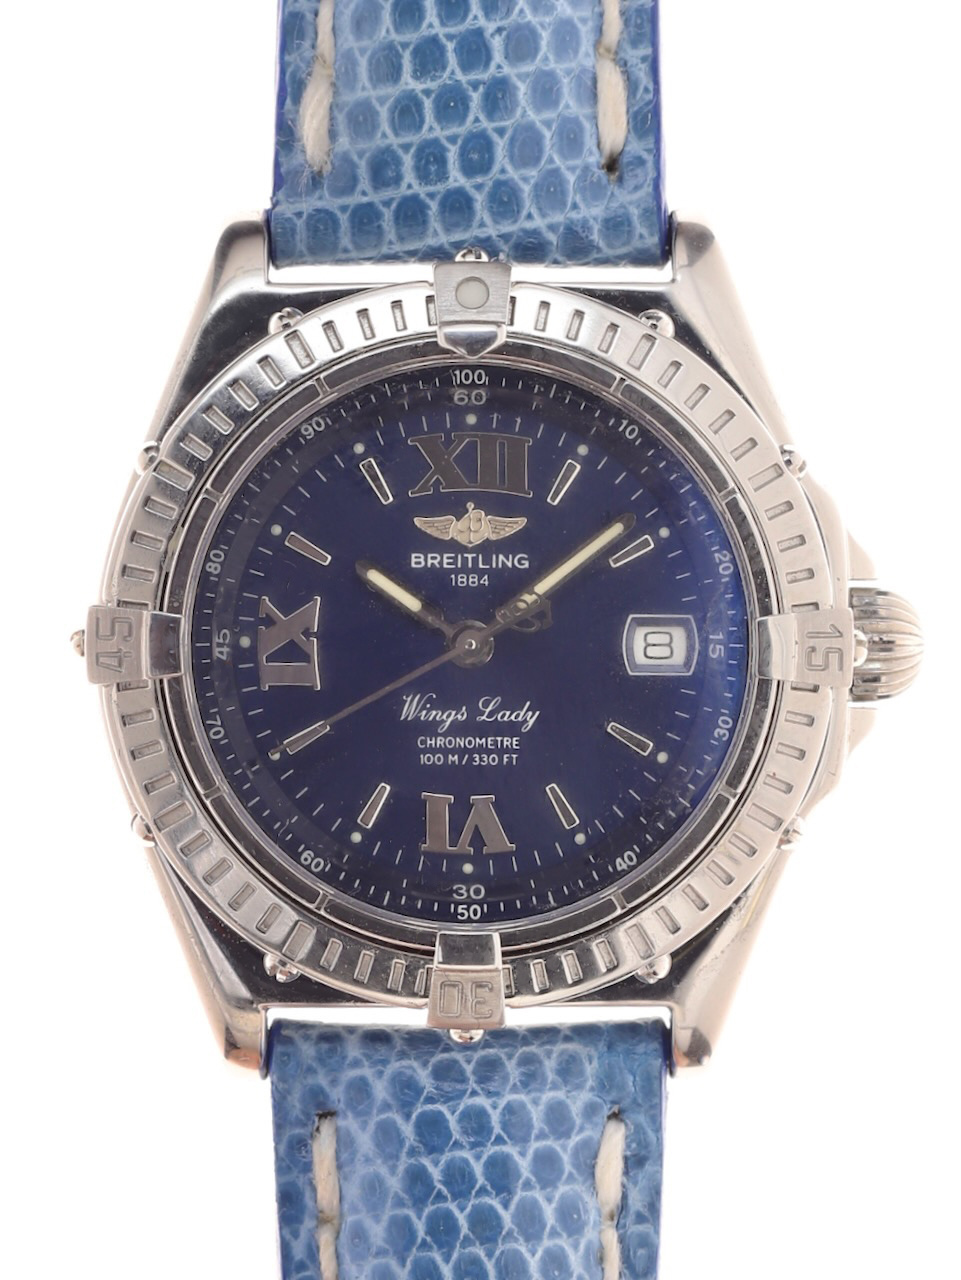 Breitling , Ref. A67350 , Wings Lady , 2000s